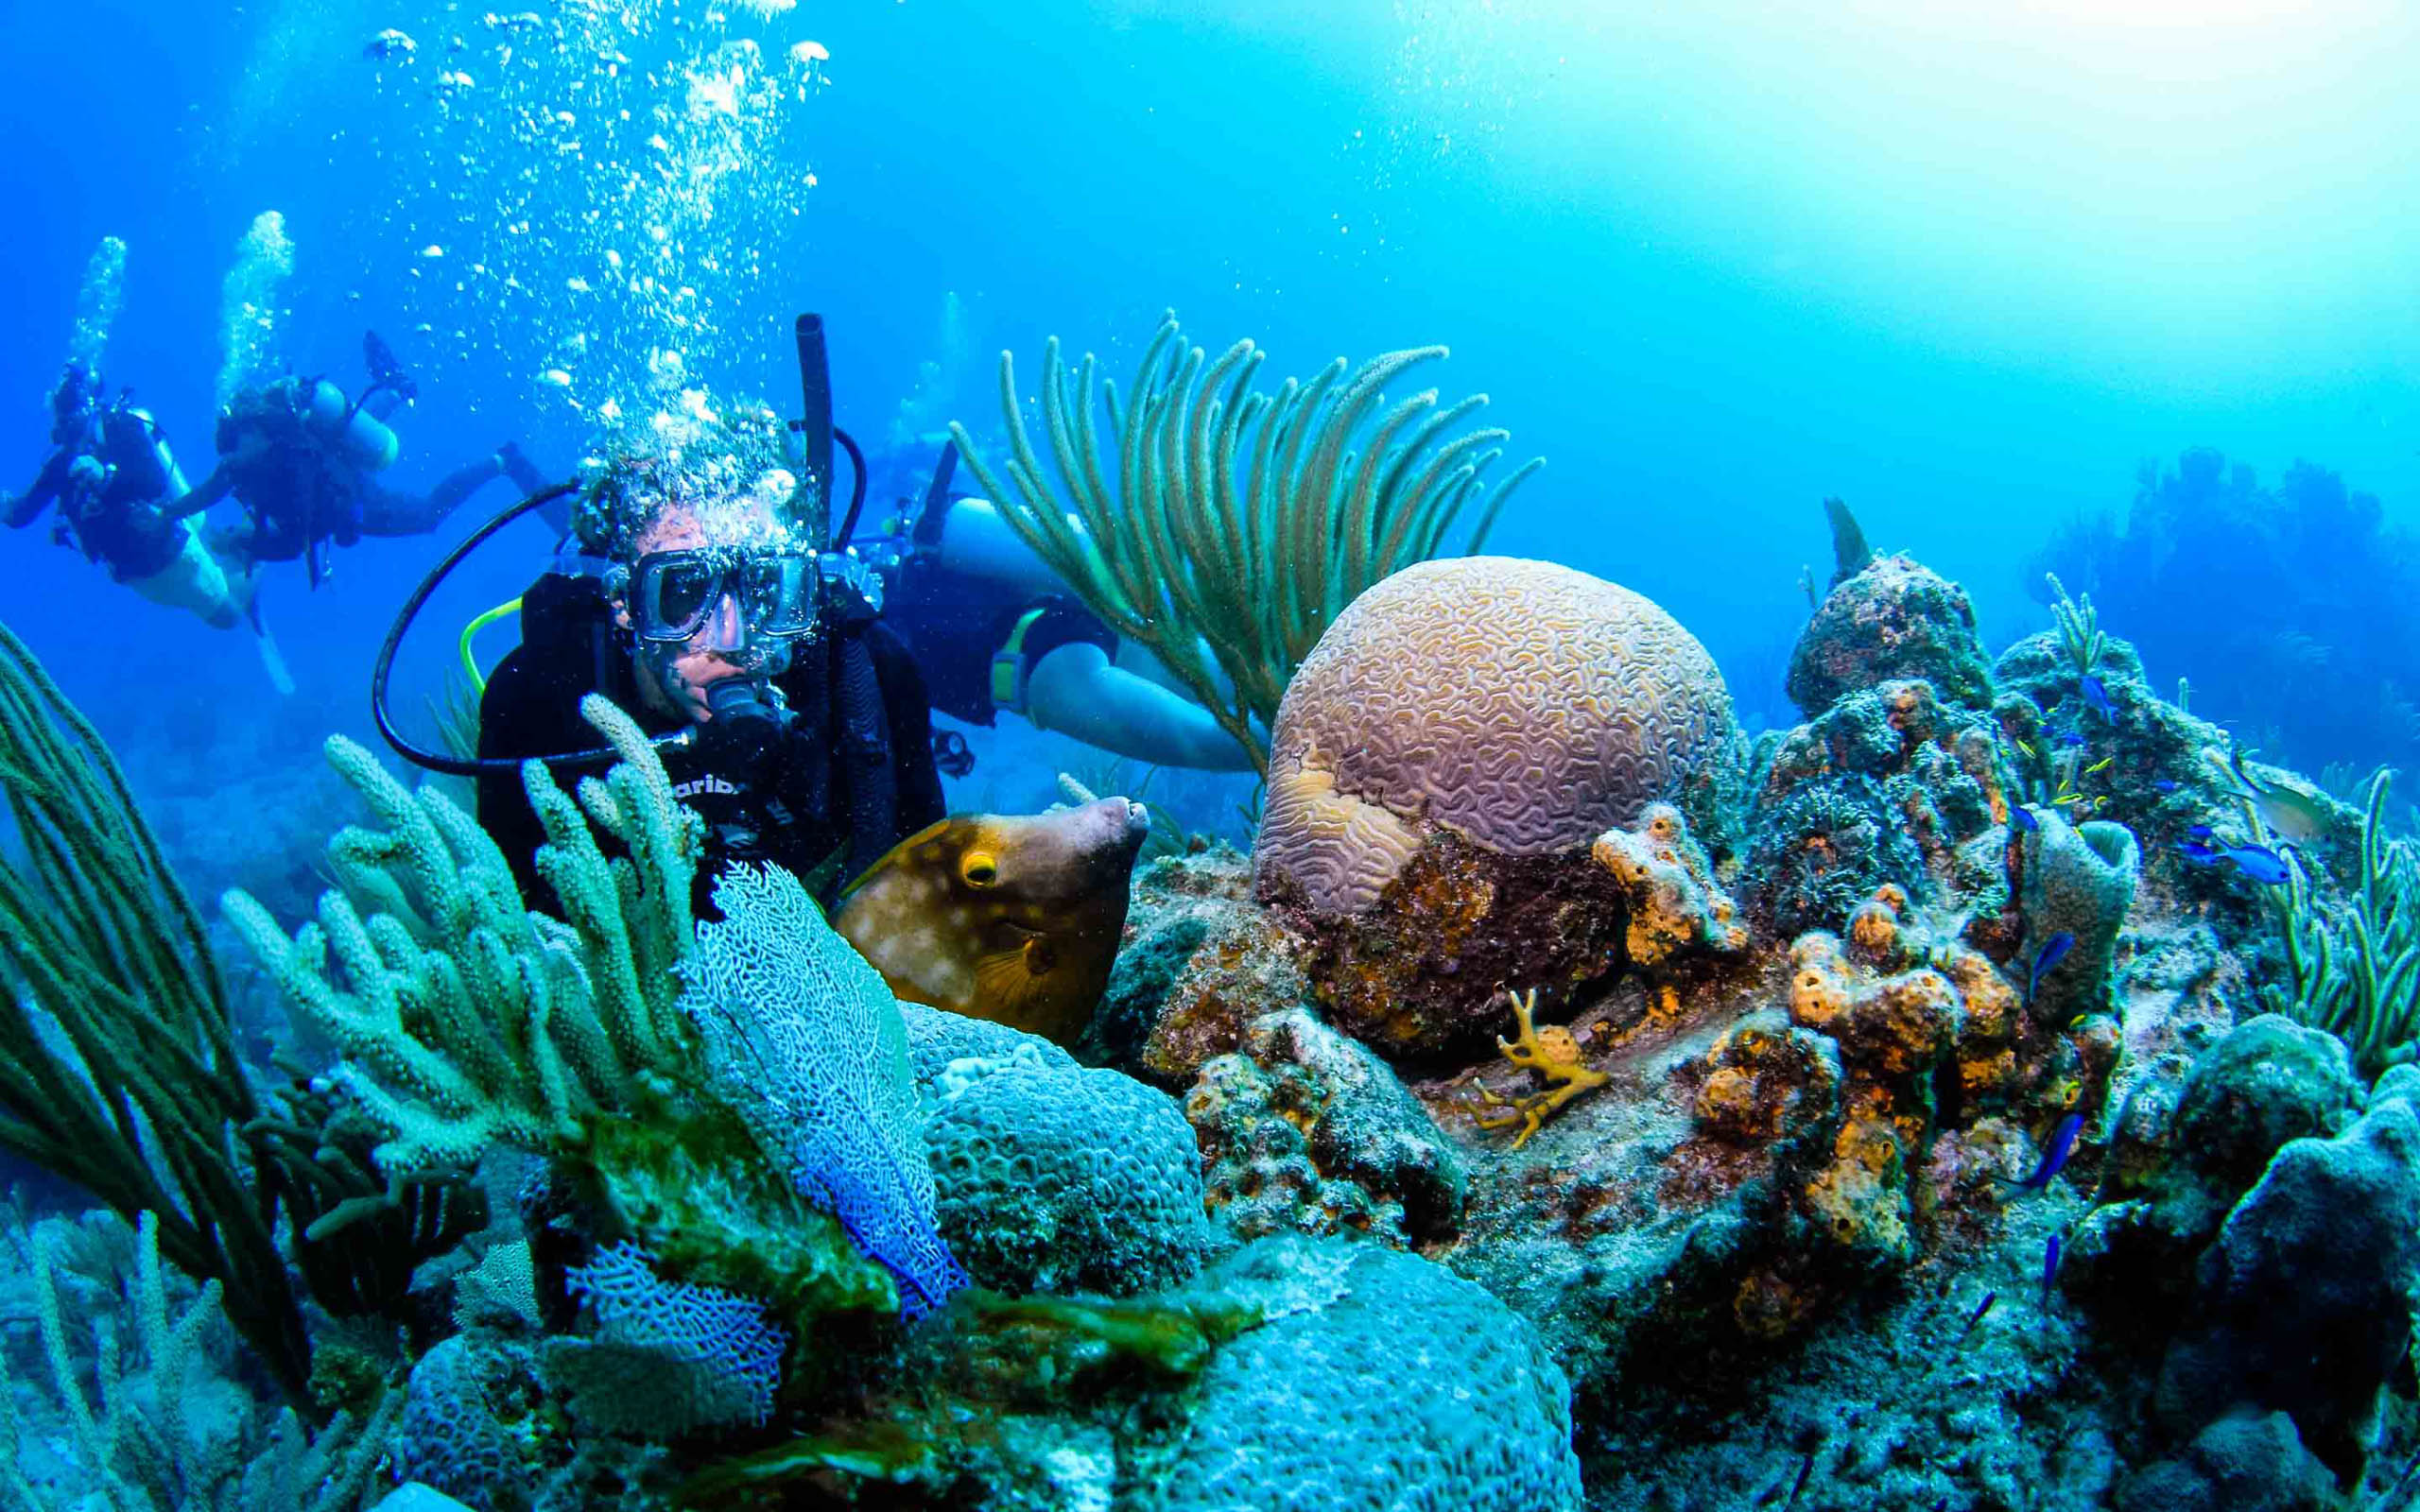 Scuba divers on a coral reef.